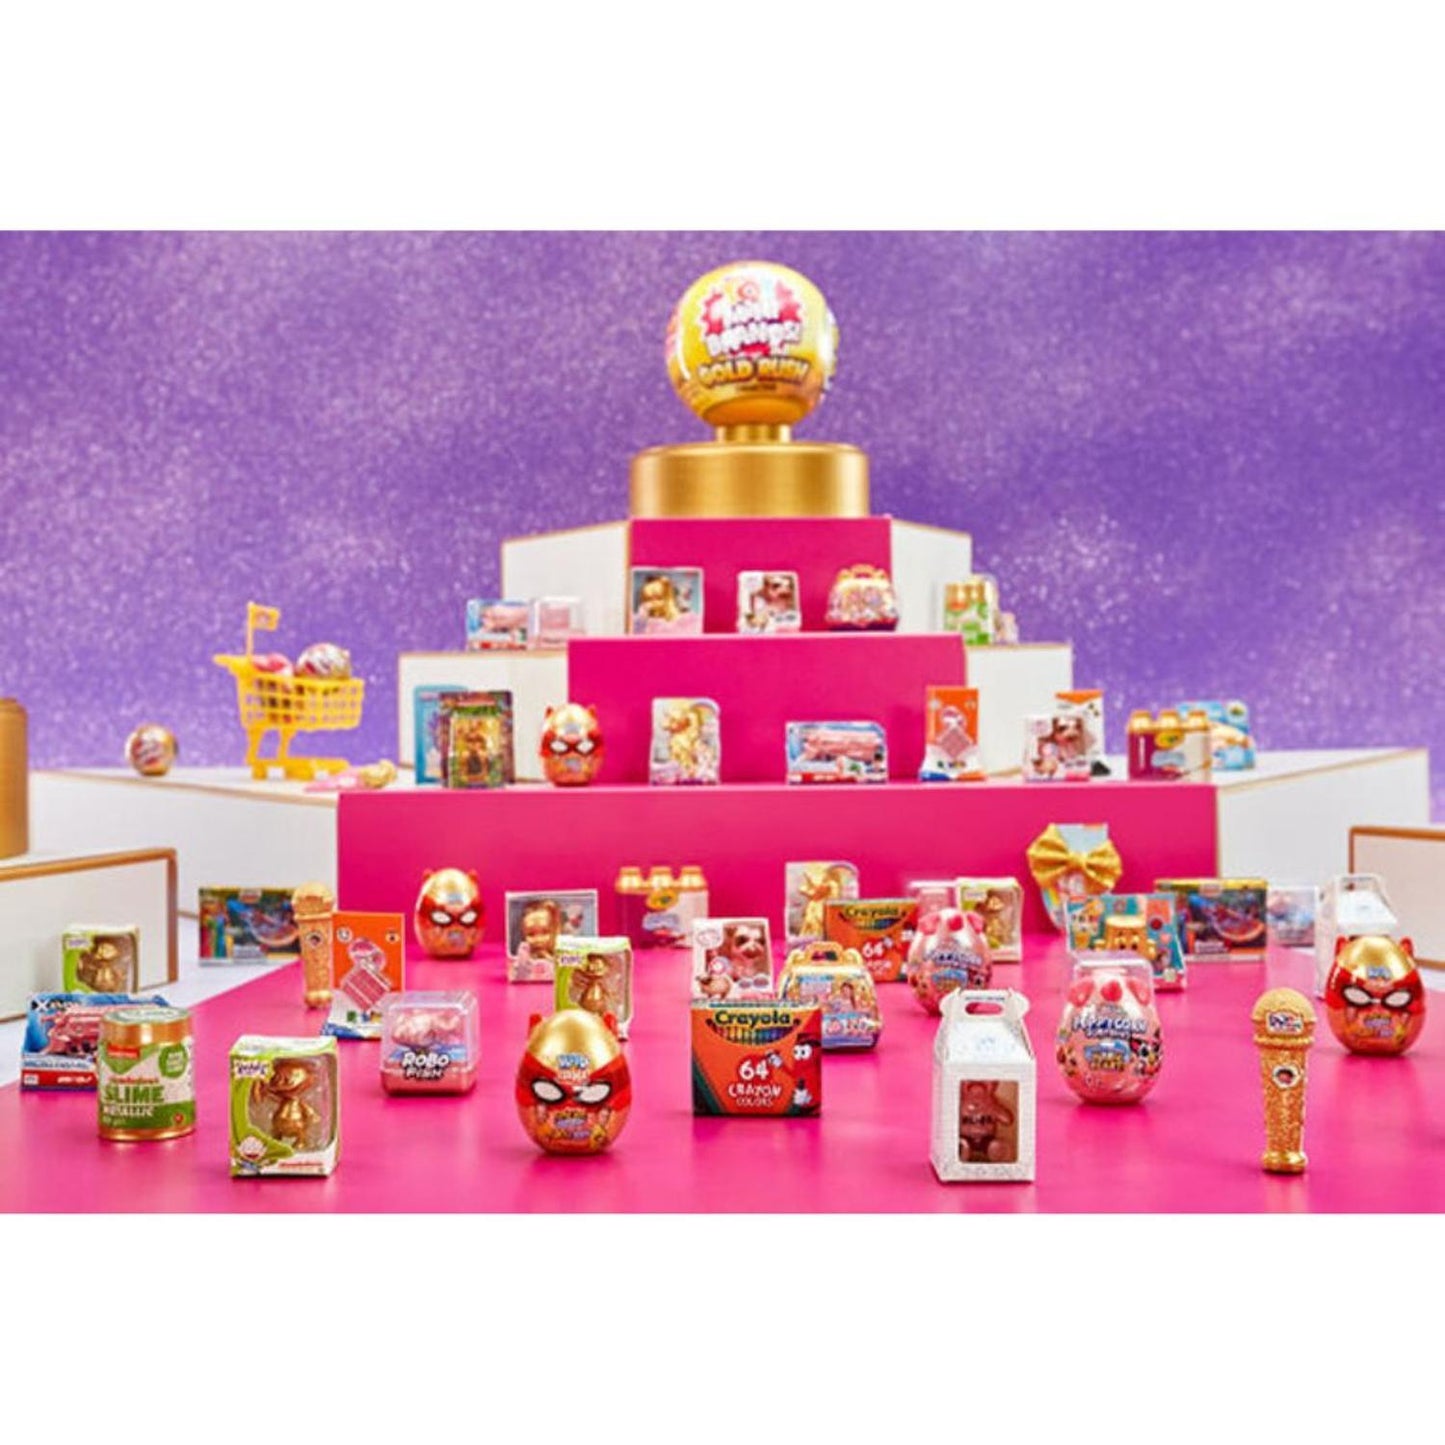 Toy Mini Brands Gold Rush Limited Edition